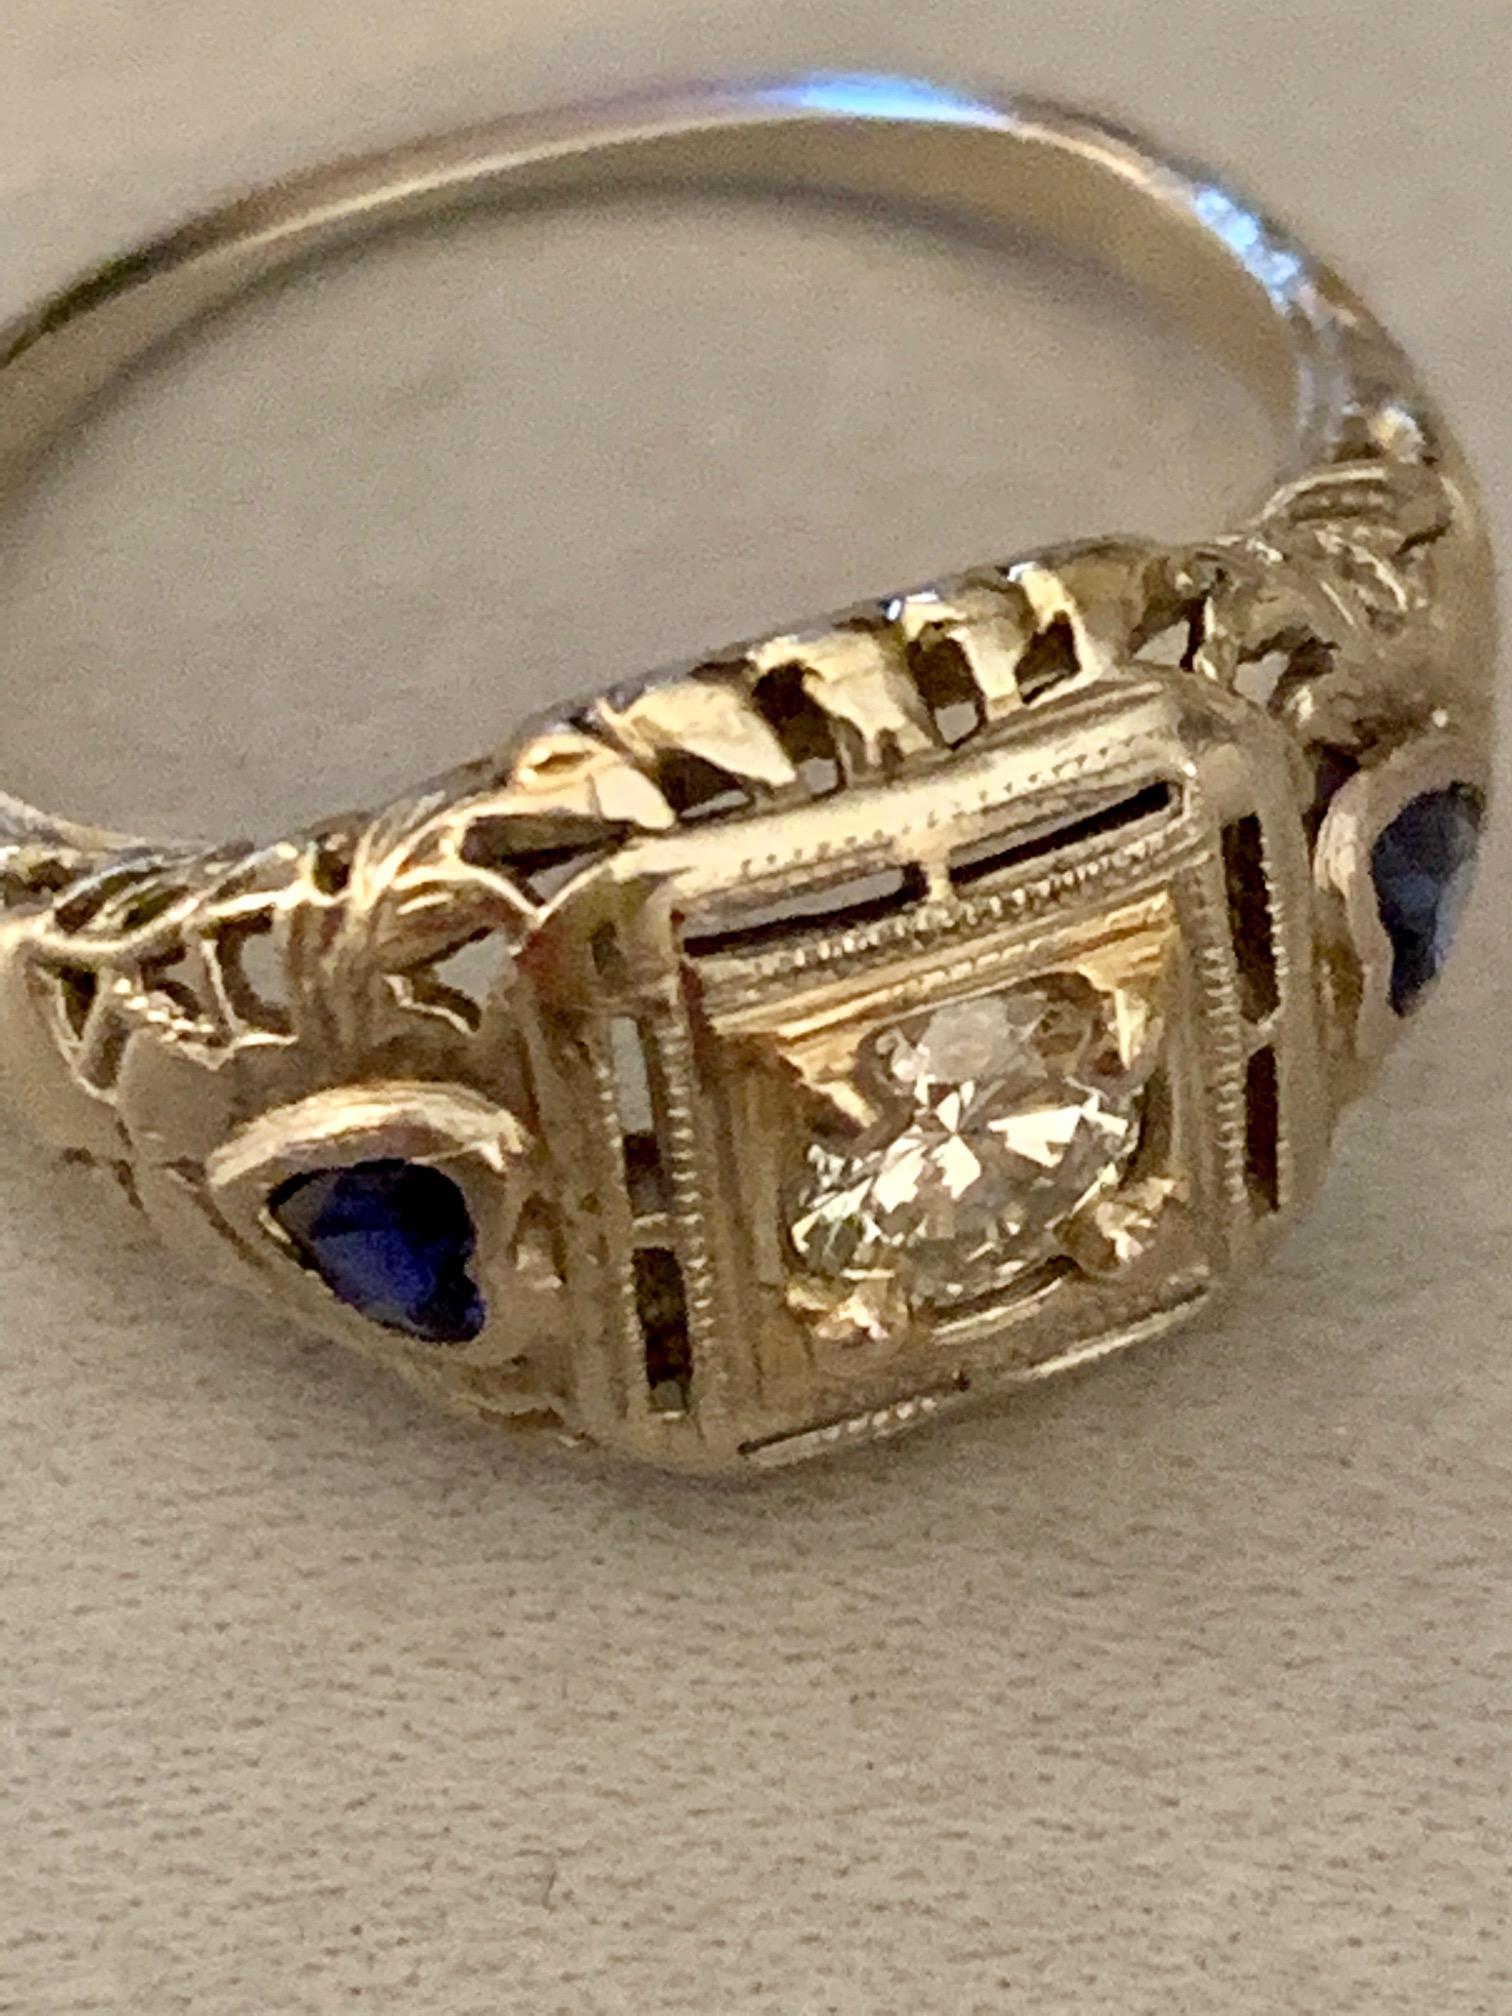 This lovely antique 18 karat white Gold ring features a 4mm brilliant cut Diamond of approximately .25 carats.  The average grade is Y-VS.  There are also two 2.7mm blue heart lab Sapphires.  

Size: 4
Weight: 2.2 grams